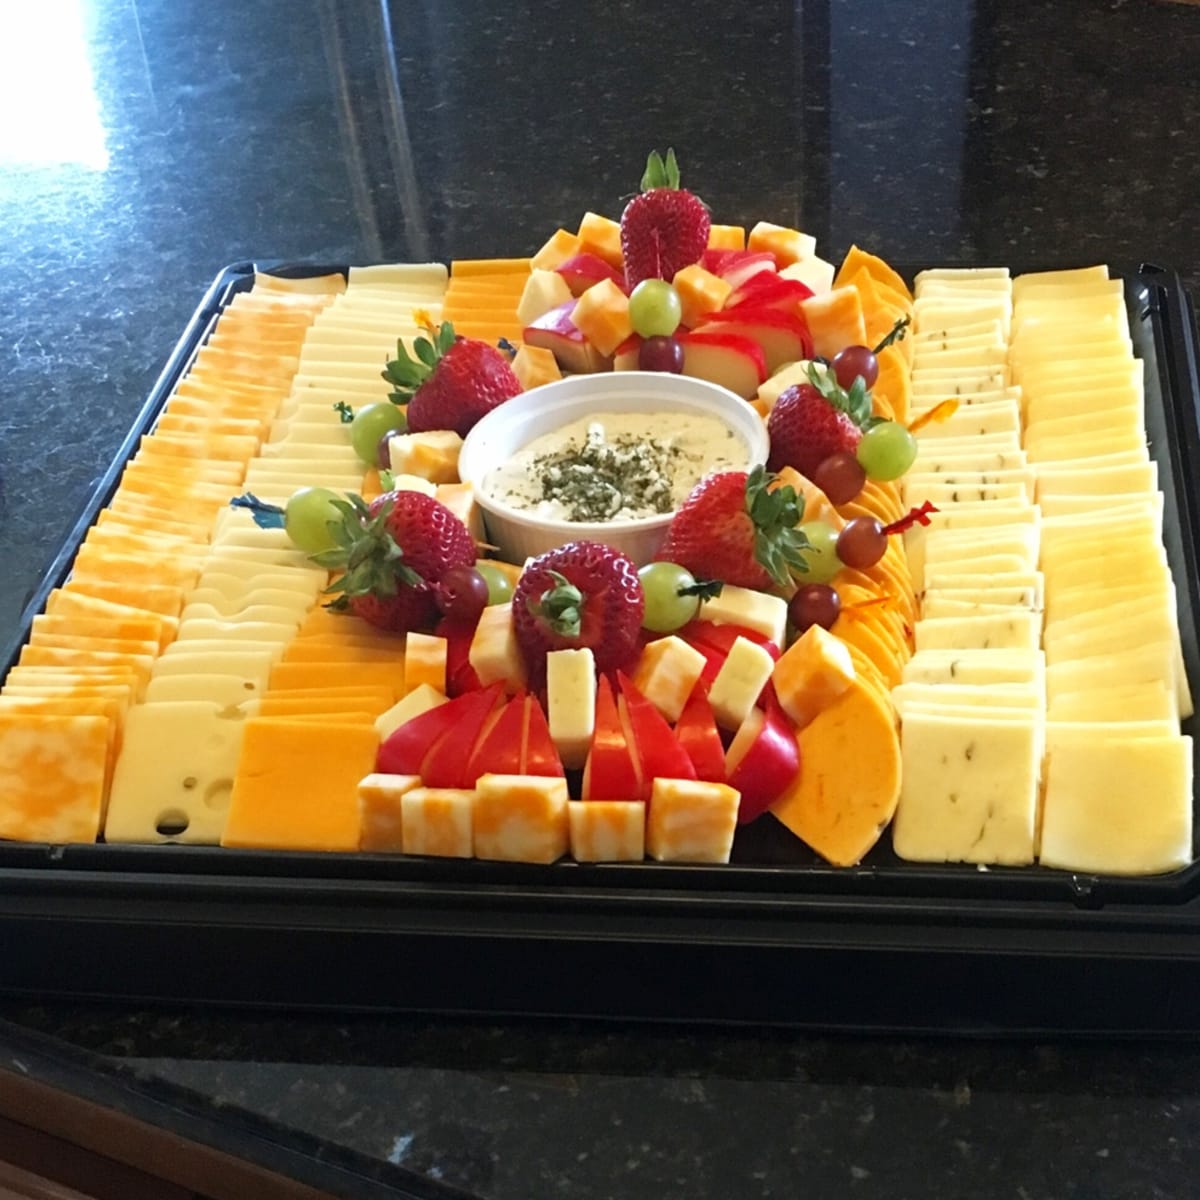 Graduation Open House Party Food Ideas For a Crowd - cold appetizers and finger foods you can make (or buy) on a budget like this fruit and cheese snack platter